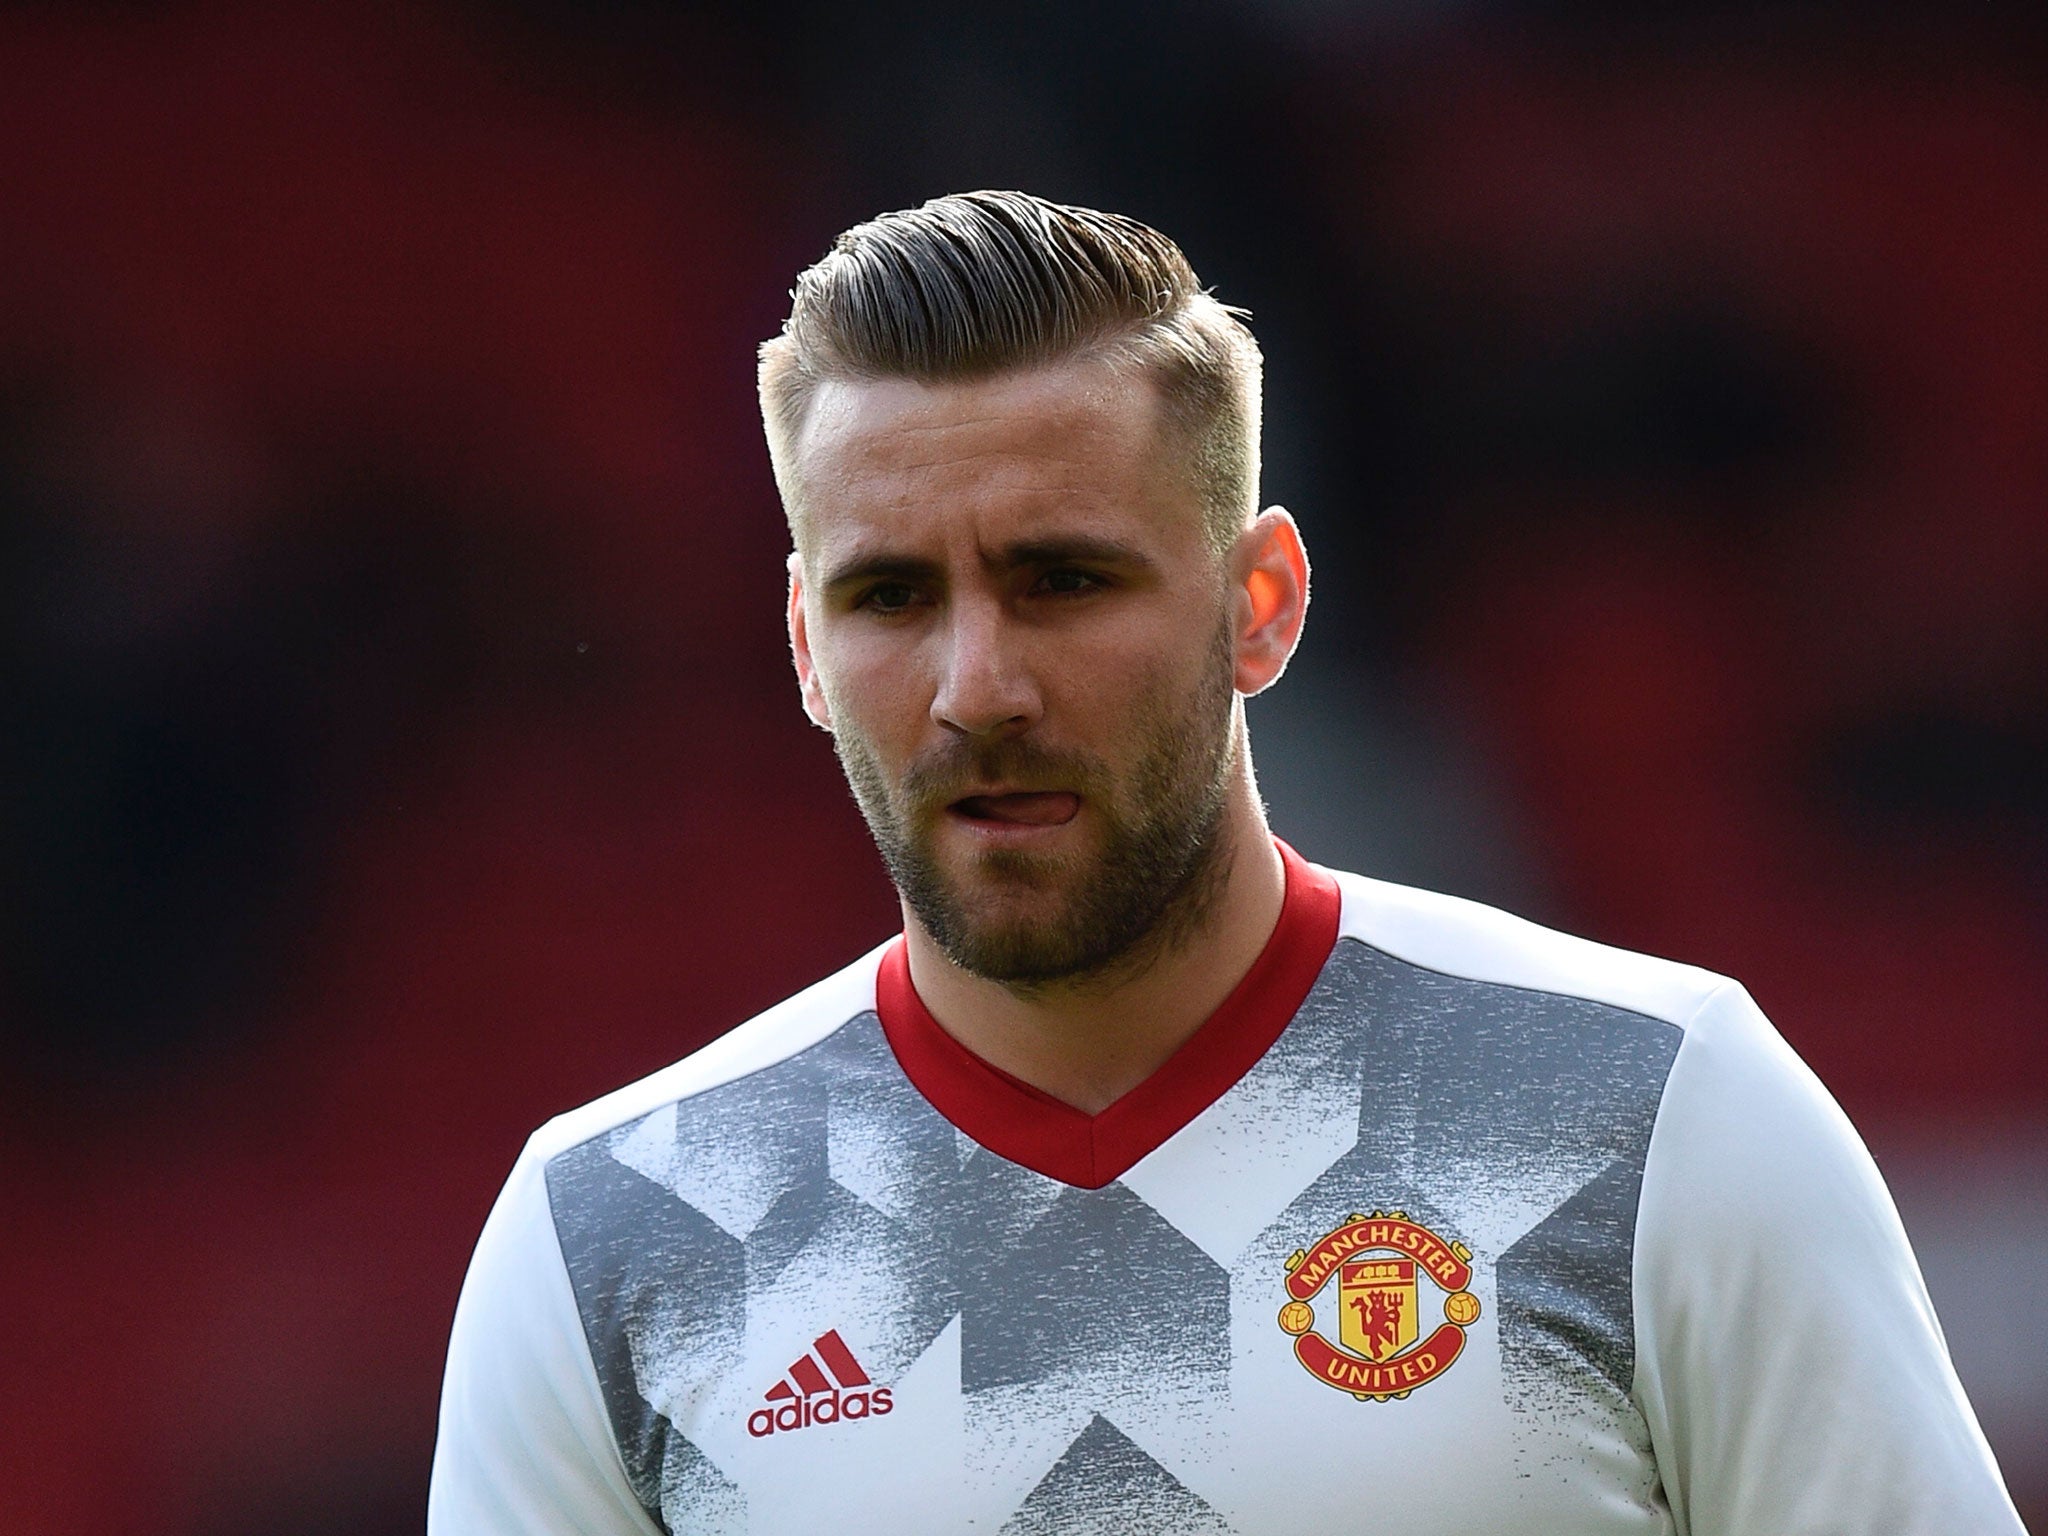 Luke Shaw has vowed to make a success of his career at Manchester United